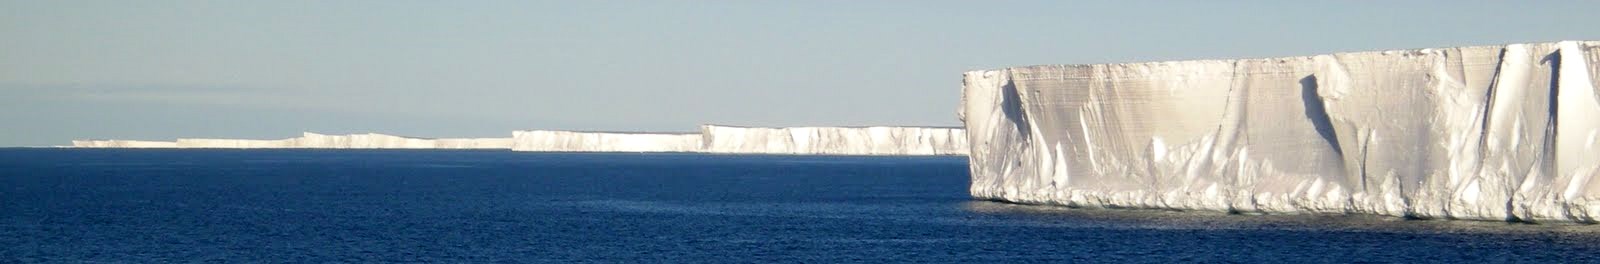 The  Mertz Glacier as seen in 2007, extending 75 km out into the Southern Ocean